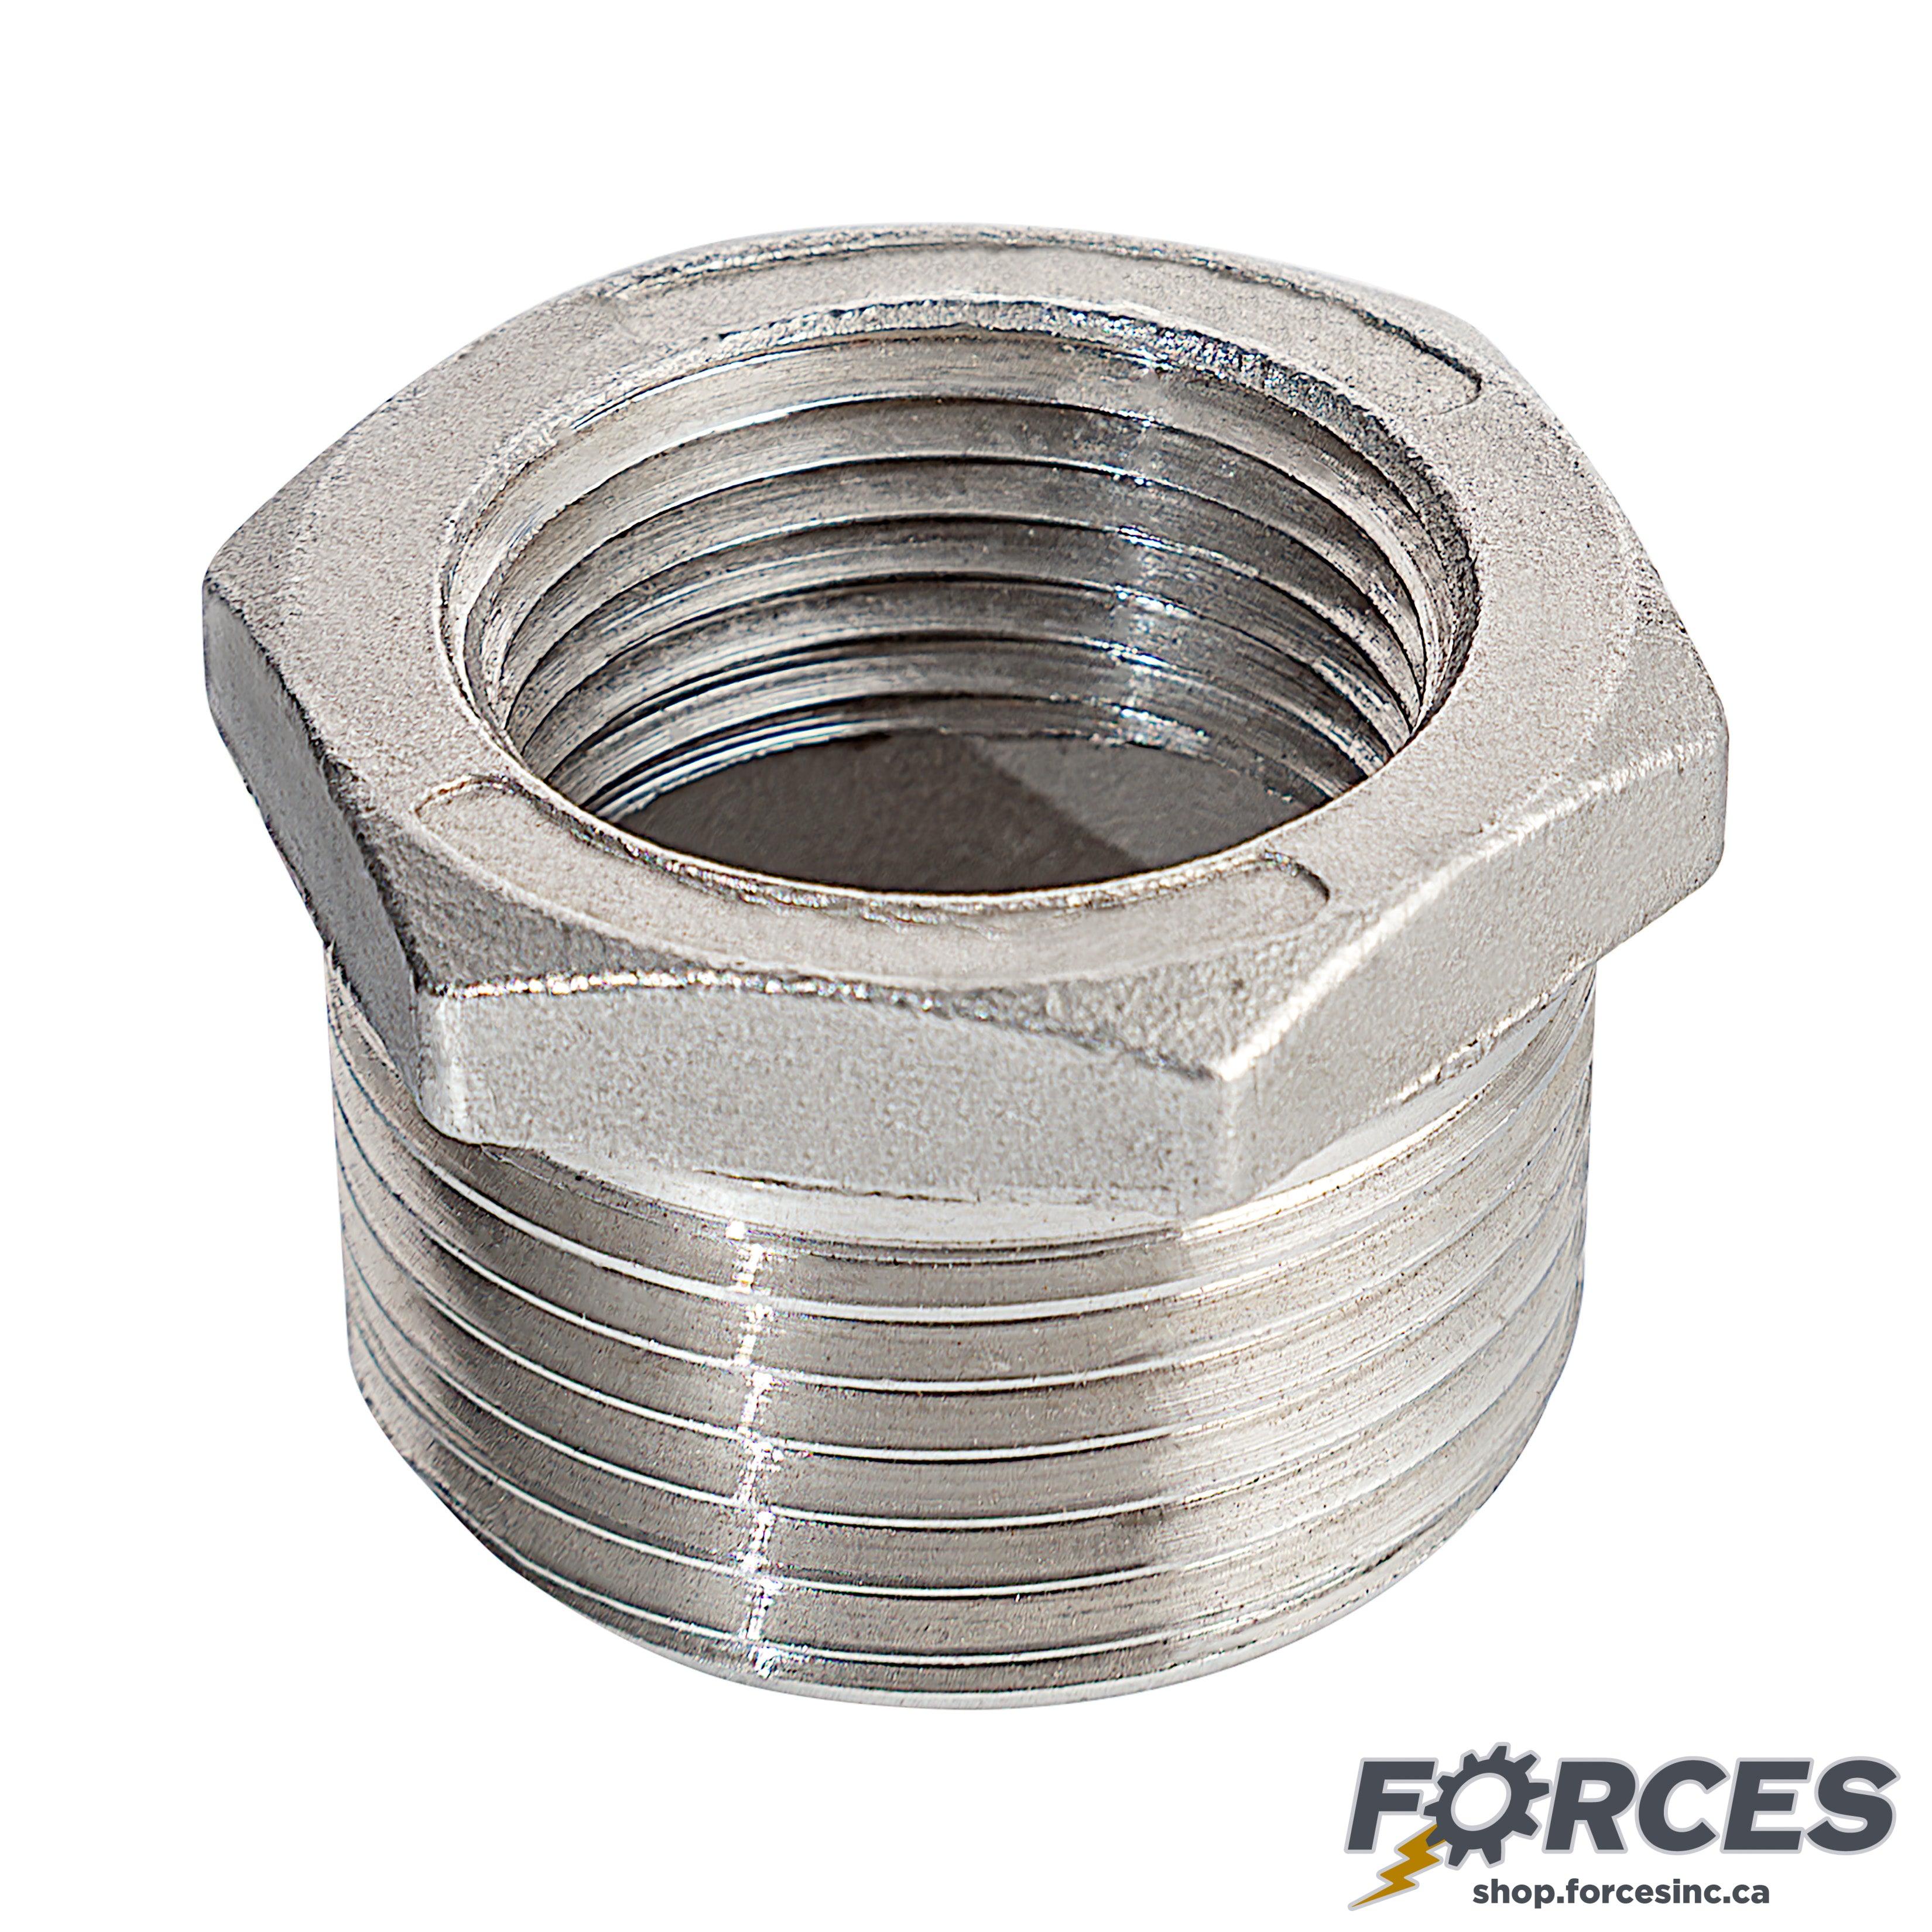 1" (M) x 1/4" (F) Reducing Hex Bushing NPT #150 - Stainless Steel 316 - Forces Inc